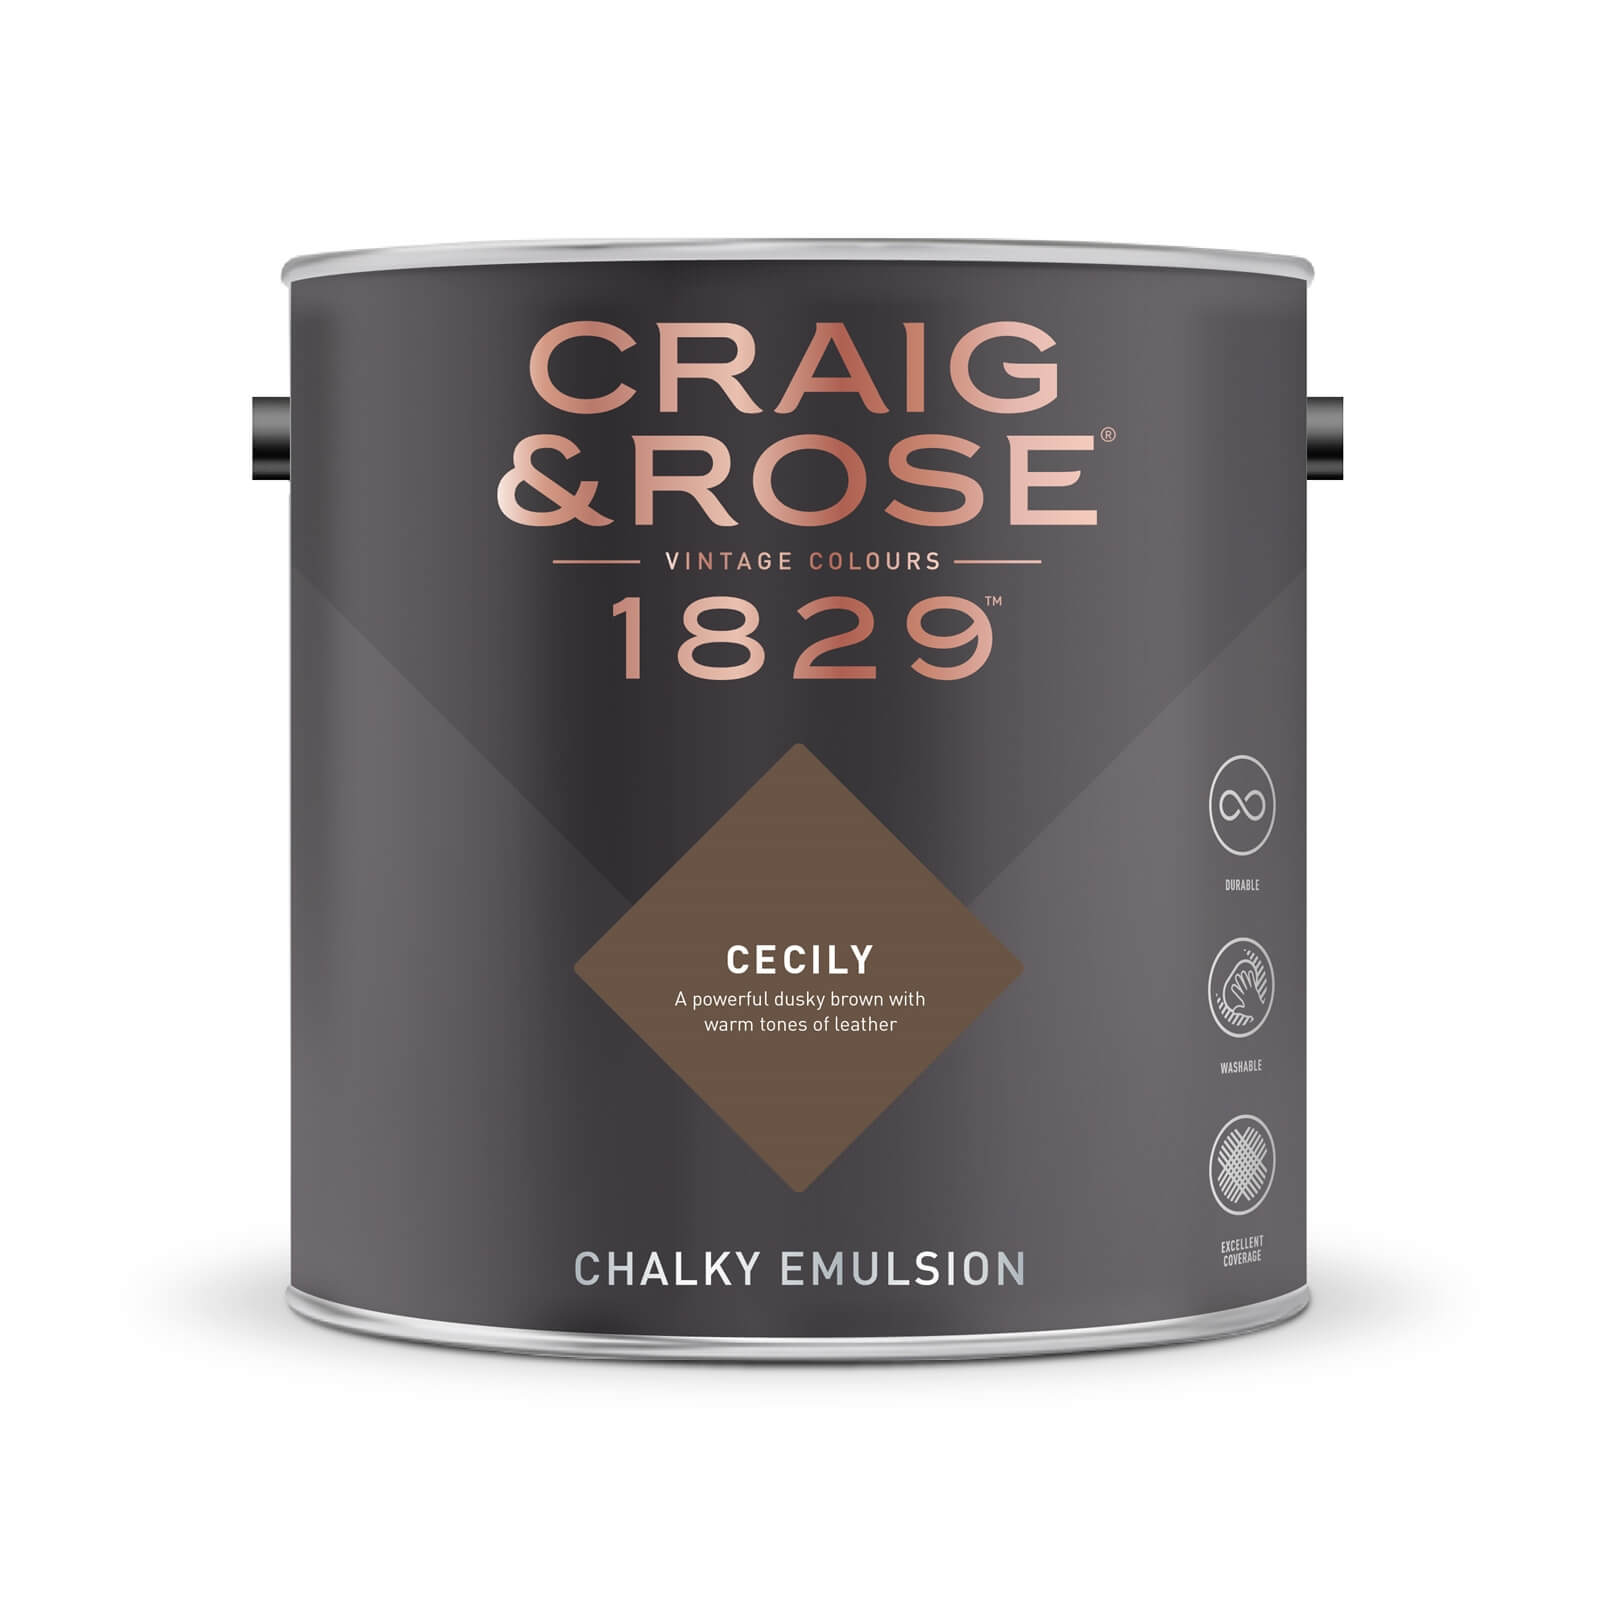 Craig & Rose 1829 Chalky Emulsion Paint Cecily - 2.5L